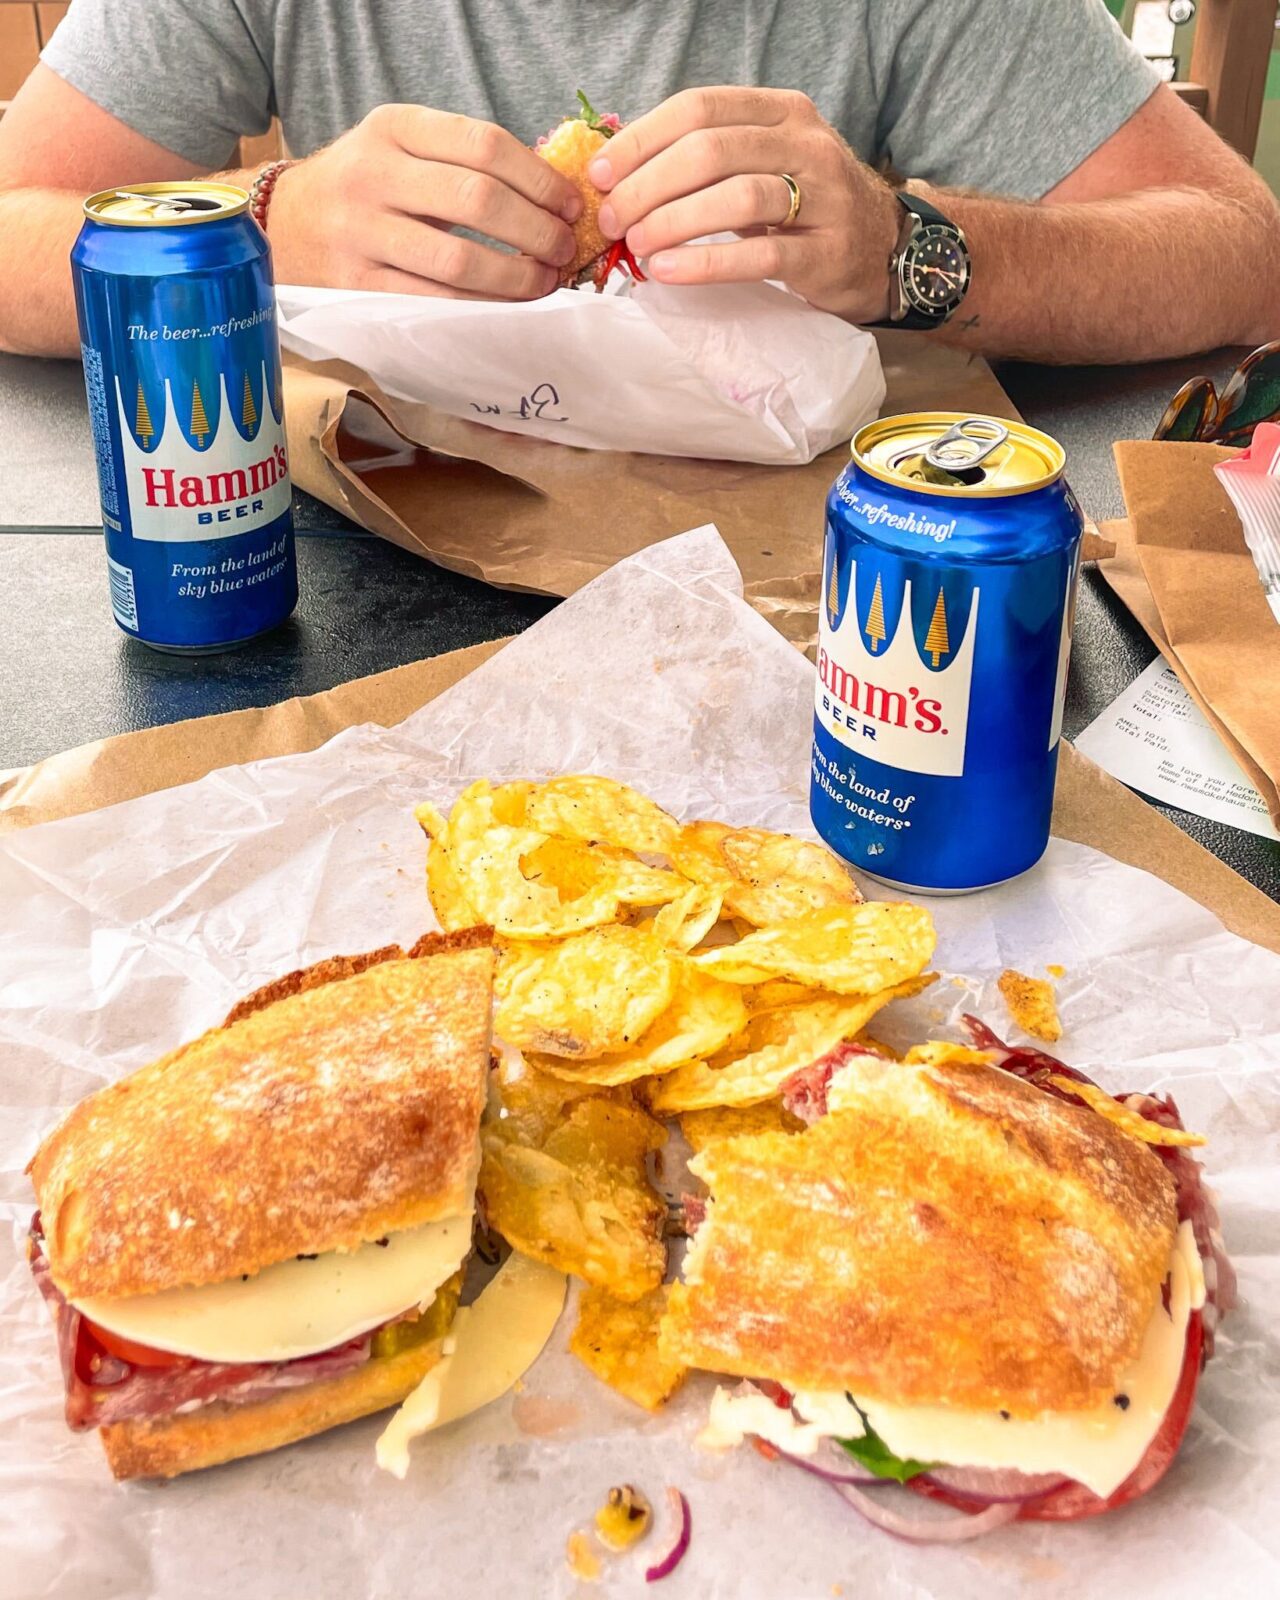 A sandwich, chips, and Hamm's beer at Northern Waters Smokehaus in Duluth, MN